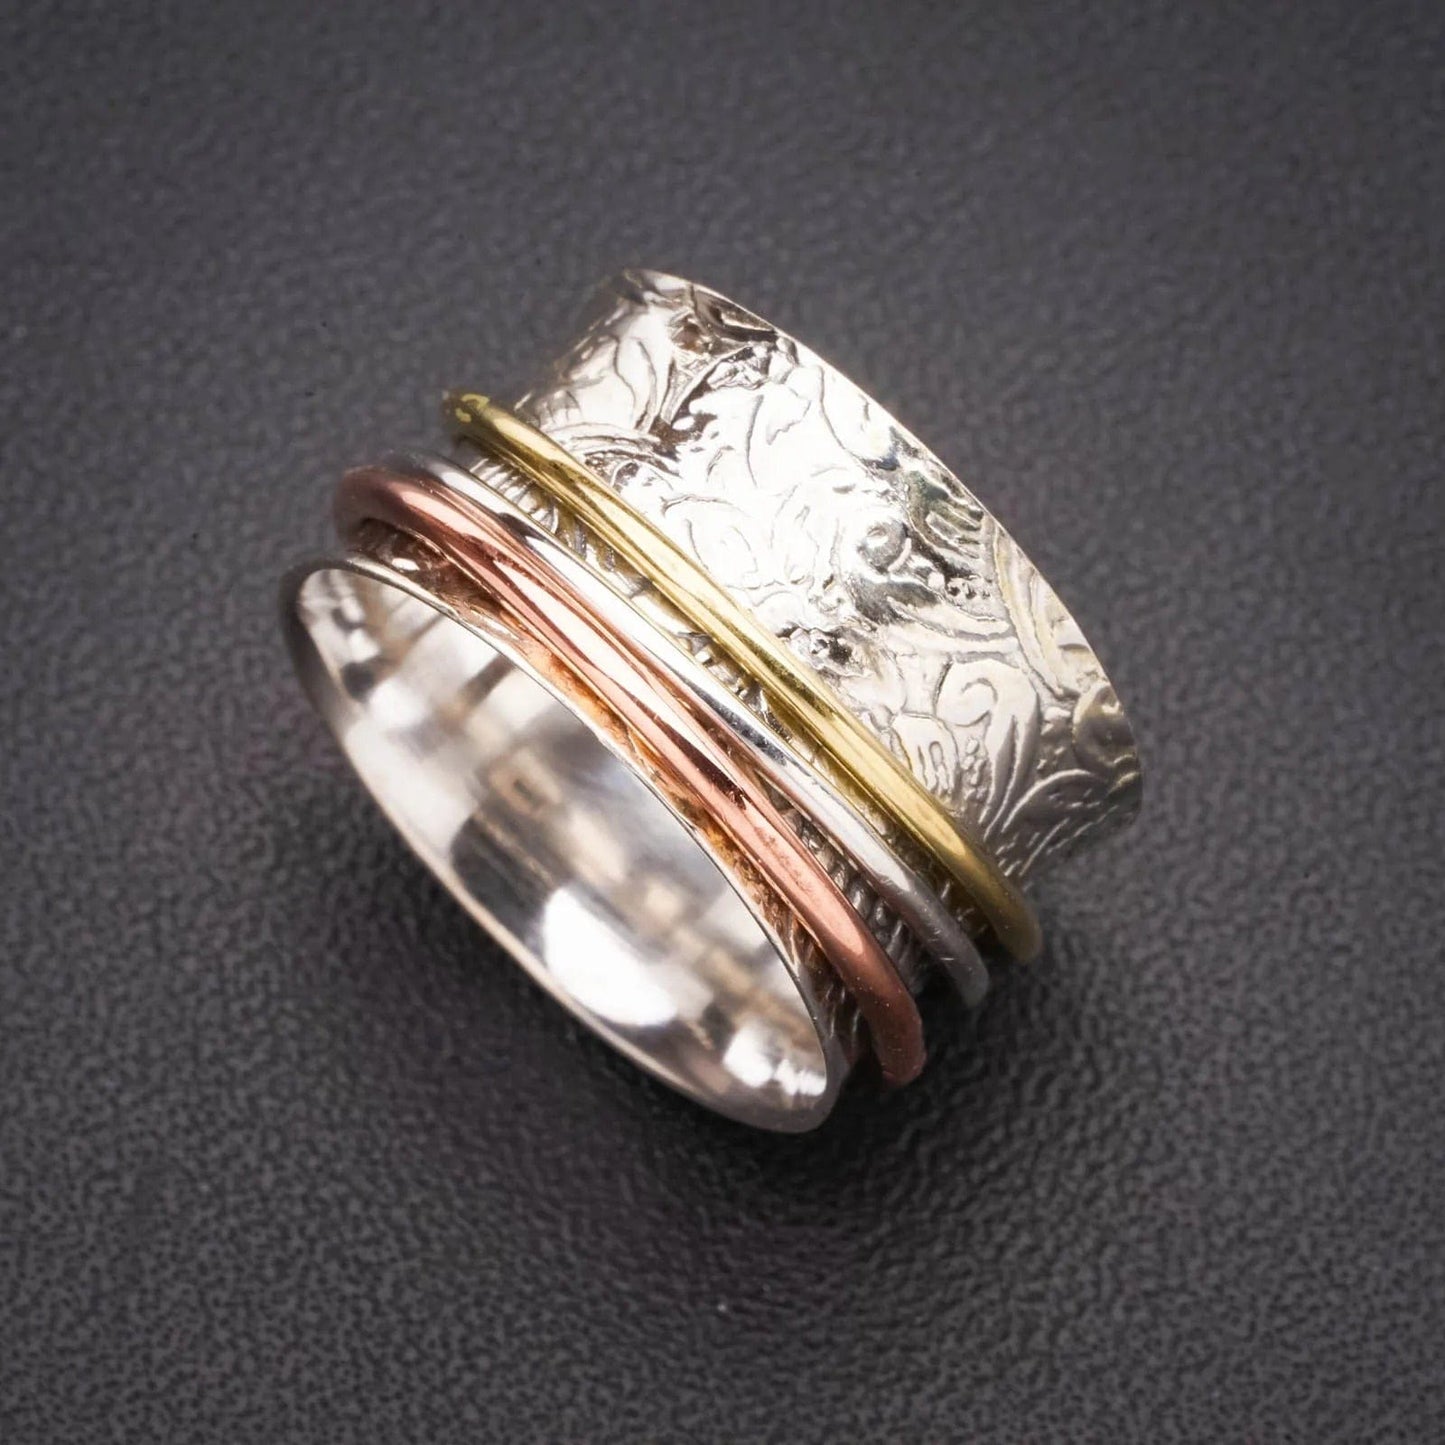 Valiant Meditation Ring - The Mindful Collection Solid .925 Sterling Silver Spinning Three Tones Triple-Layer Handmade 925 Sterling Silver Ring